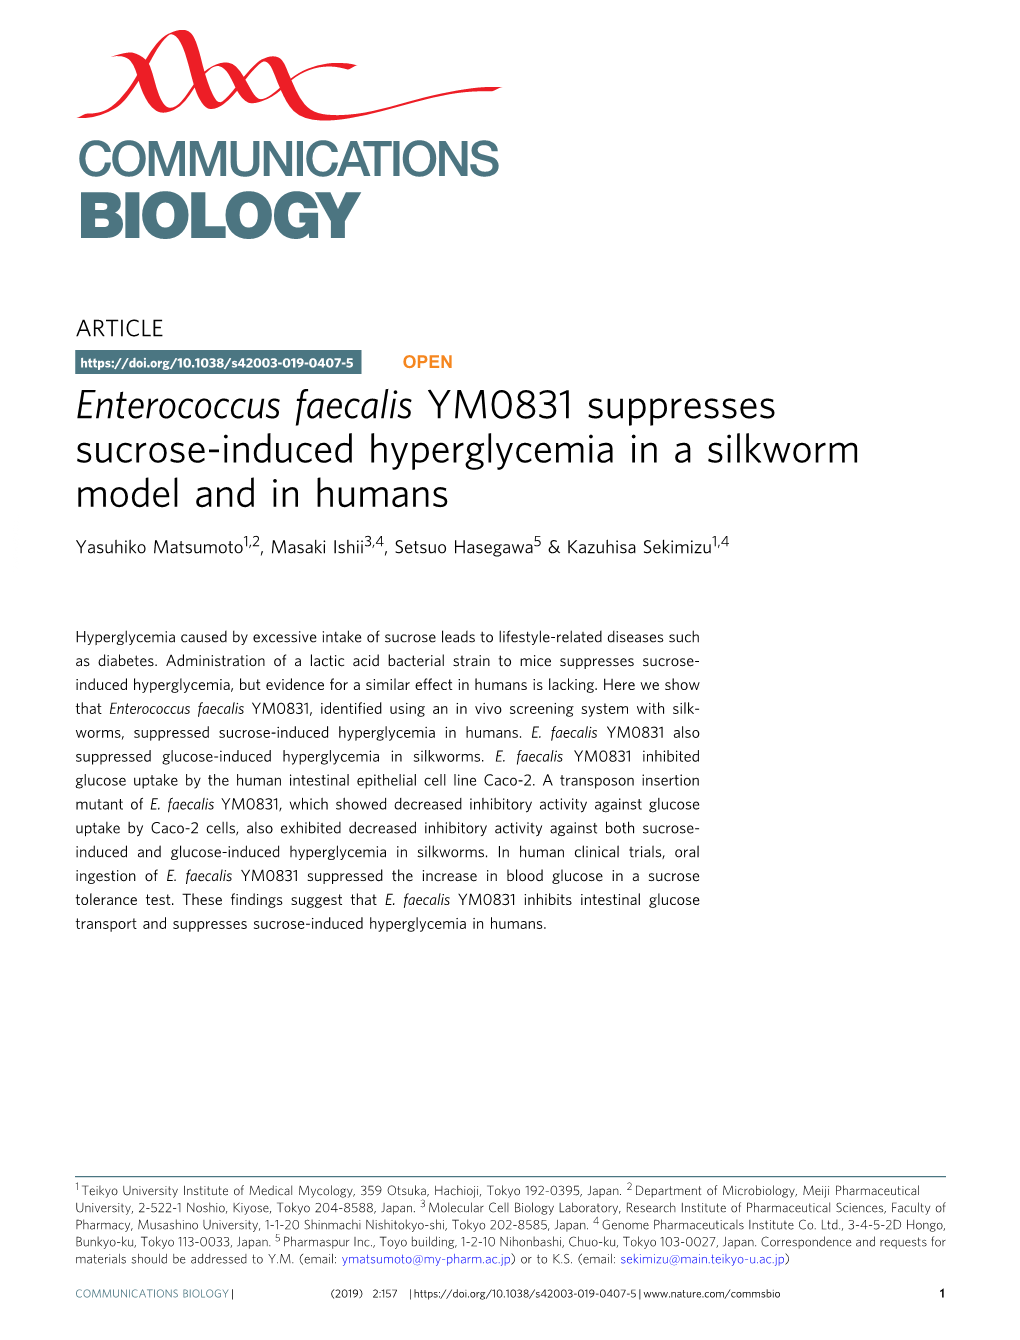 Enterococcus Faecalis YM0831 Suppresses Sucrose-Induced Hyperglycemia in a Silkworm Model and in Humans